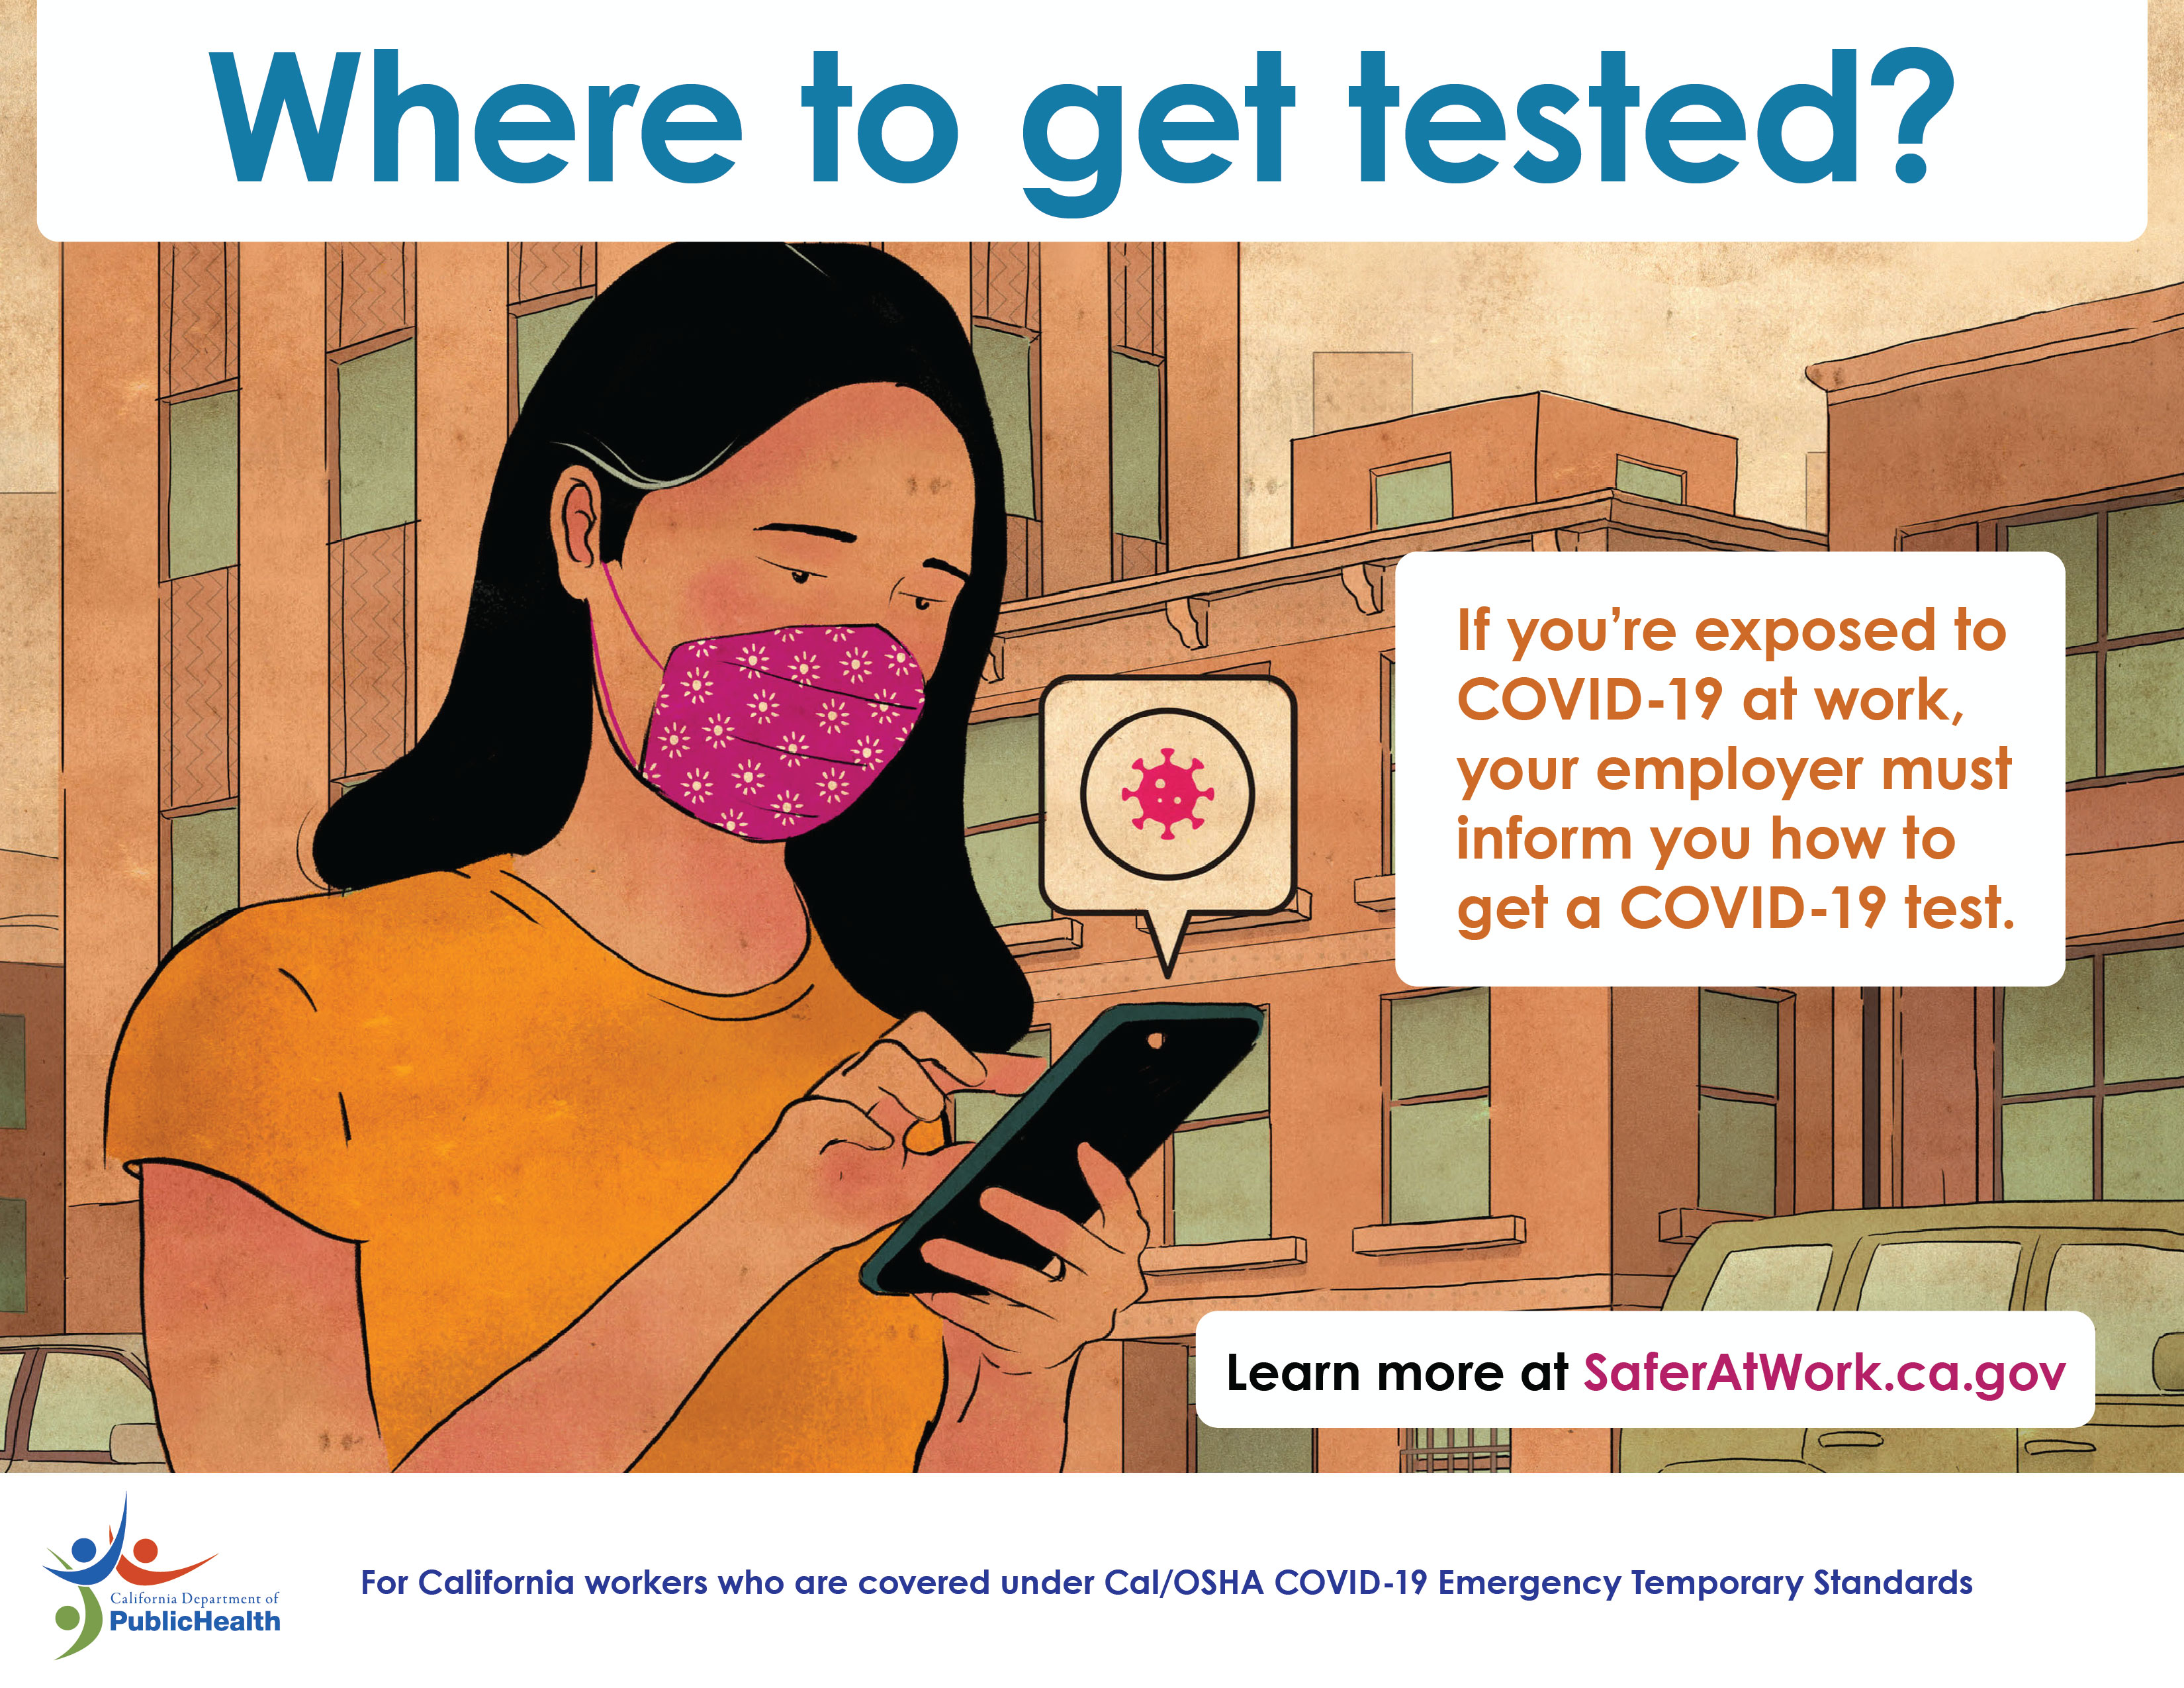 A woman searches on her phone. Text: Where to get tested? If you're exposed to COVID-19 at work, your employer must inform you how to get a COVID-19 test.